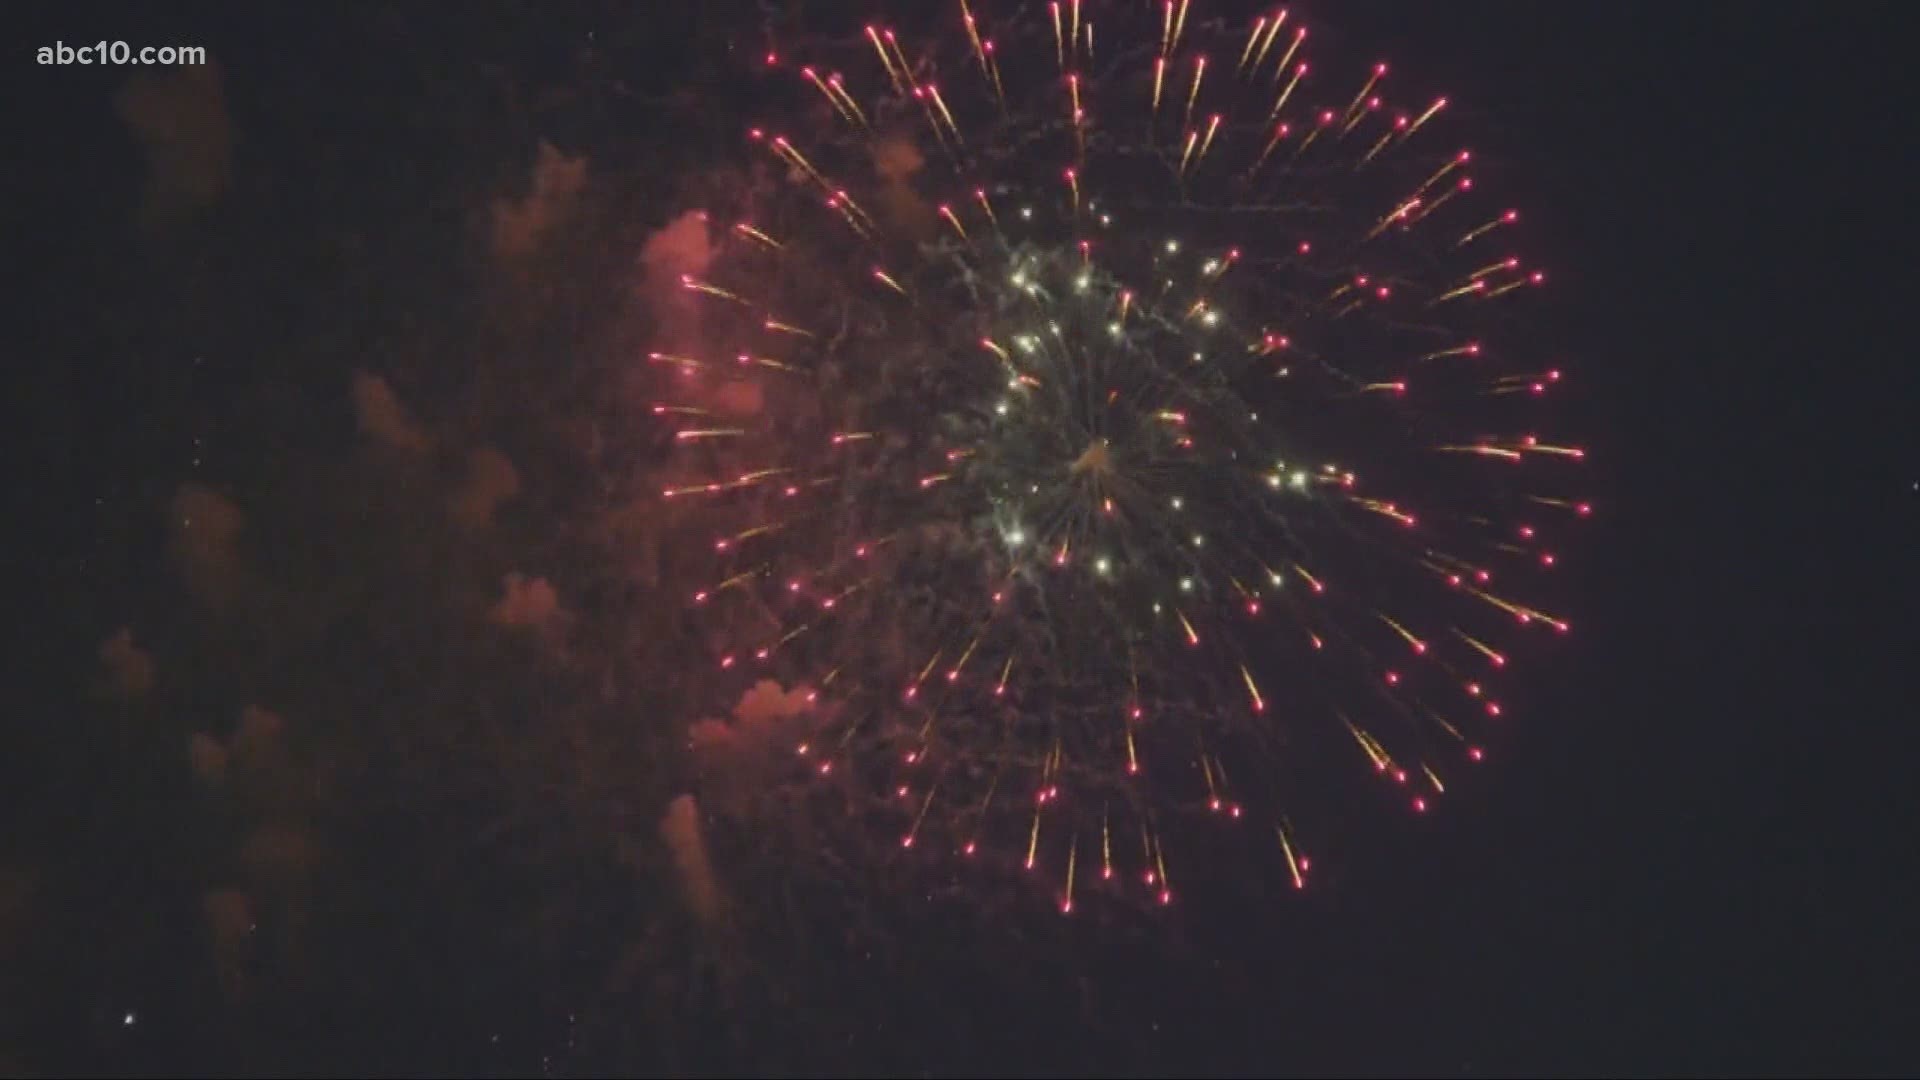 Health officials say avoid bars or house parties as you celebrate the 4th of July this year, to help stop the spread of coronavirus.